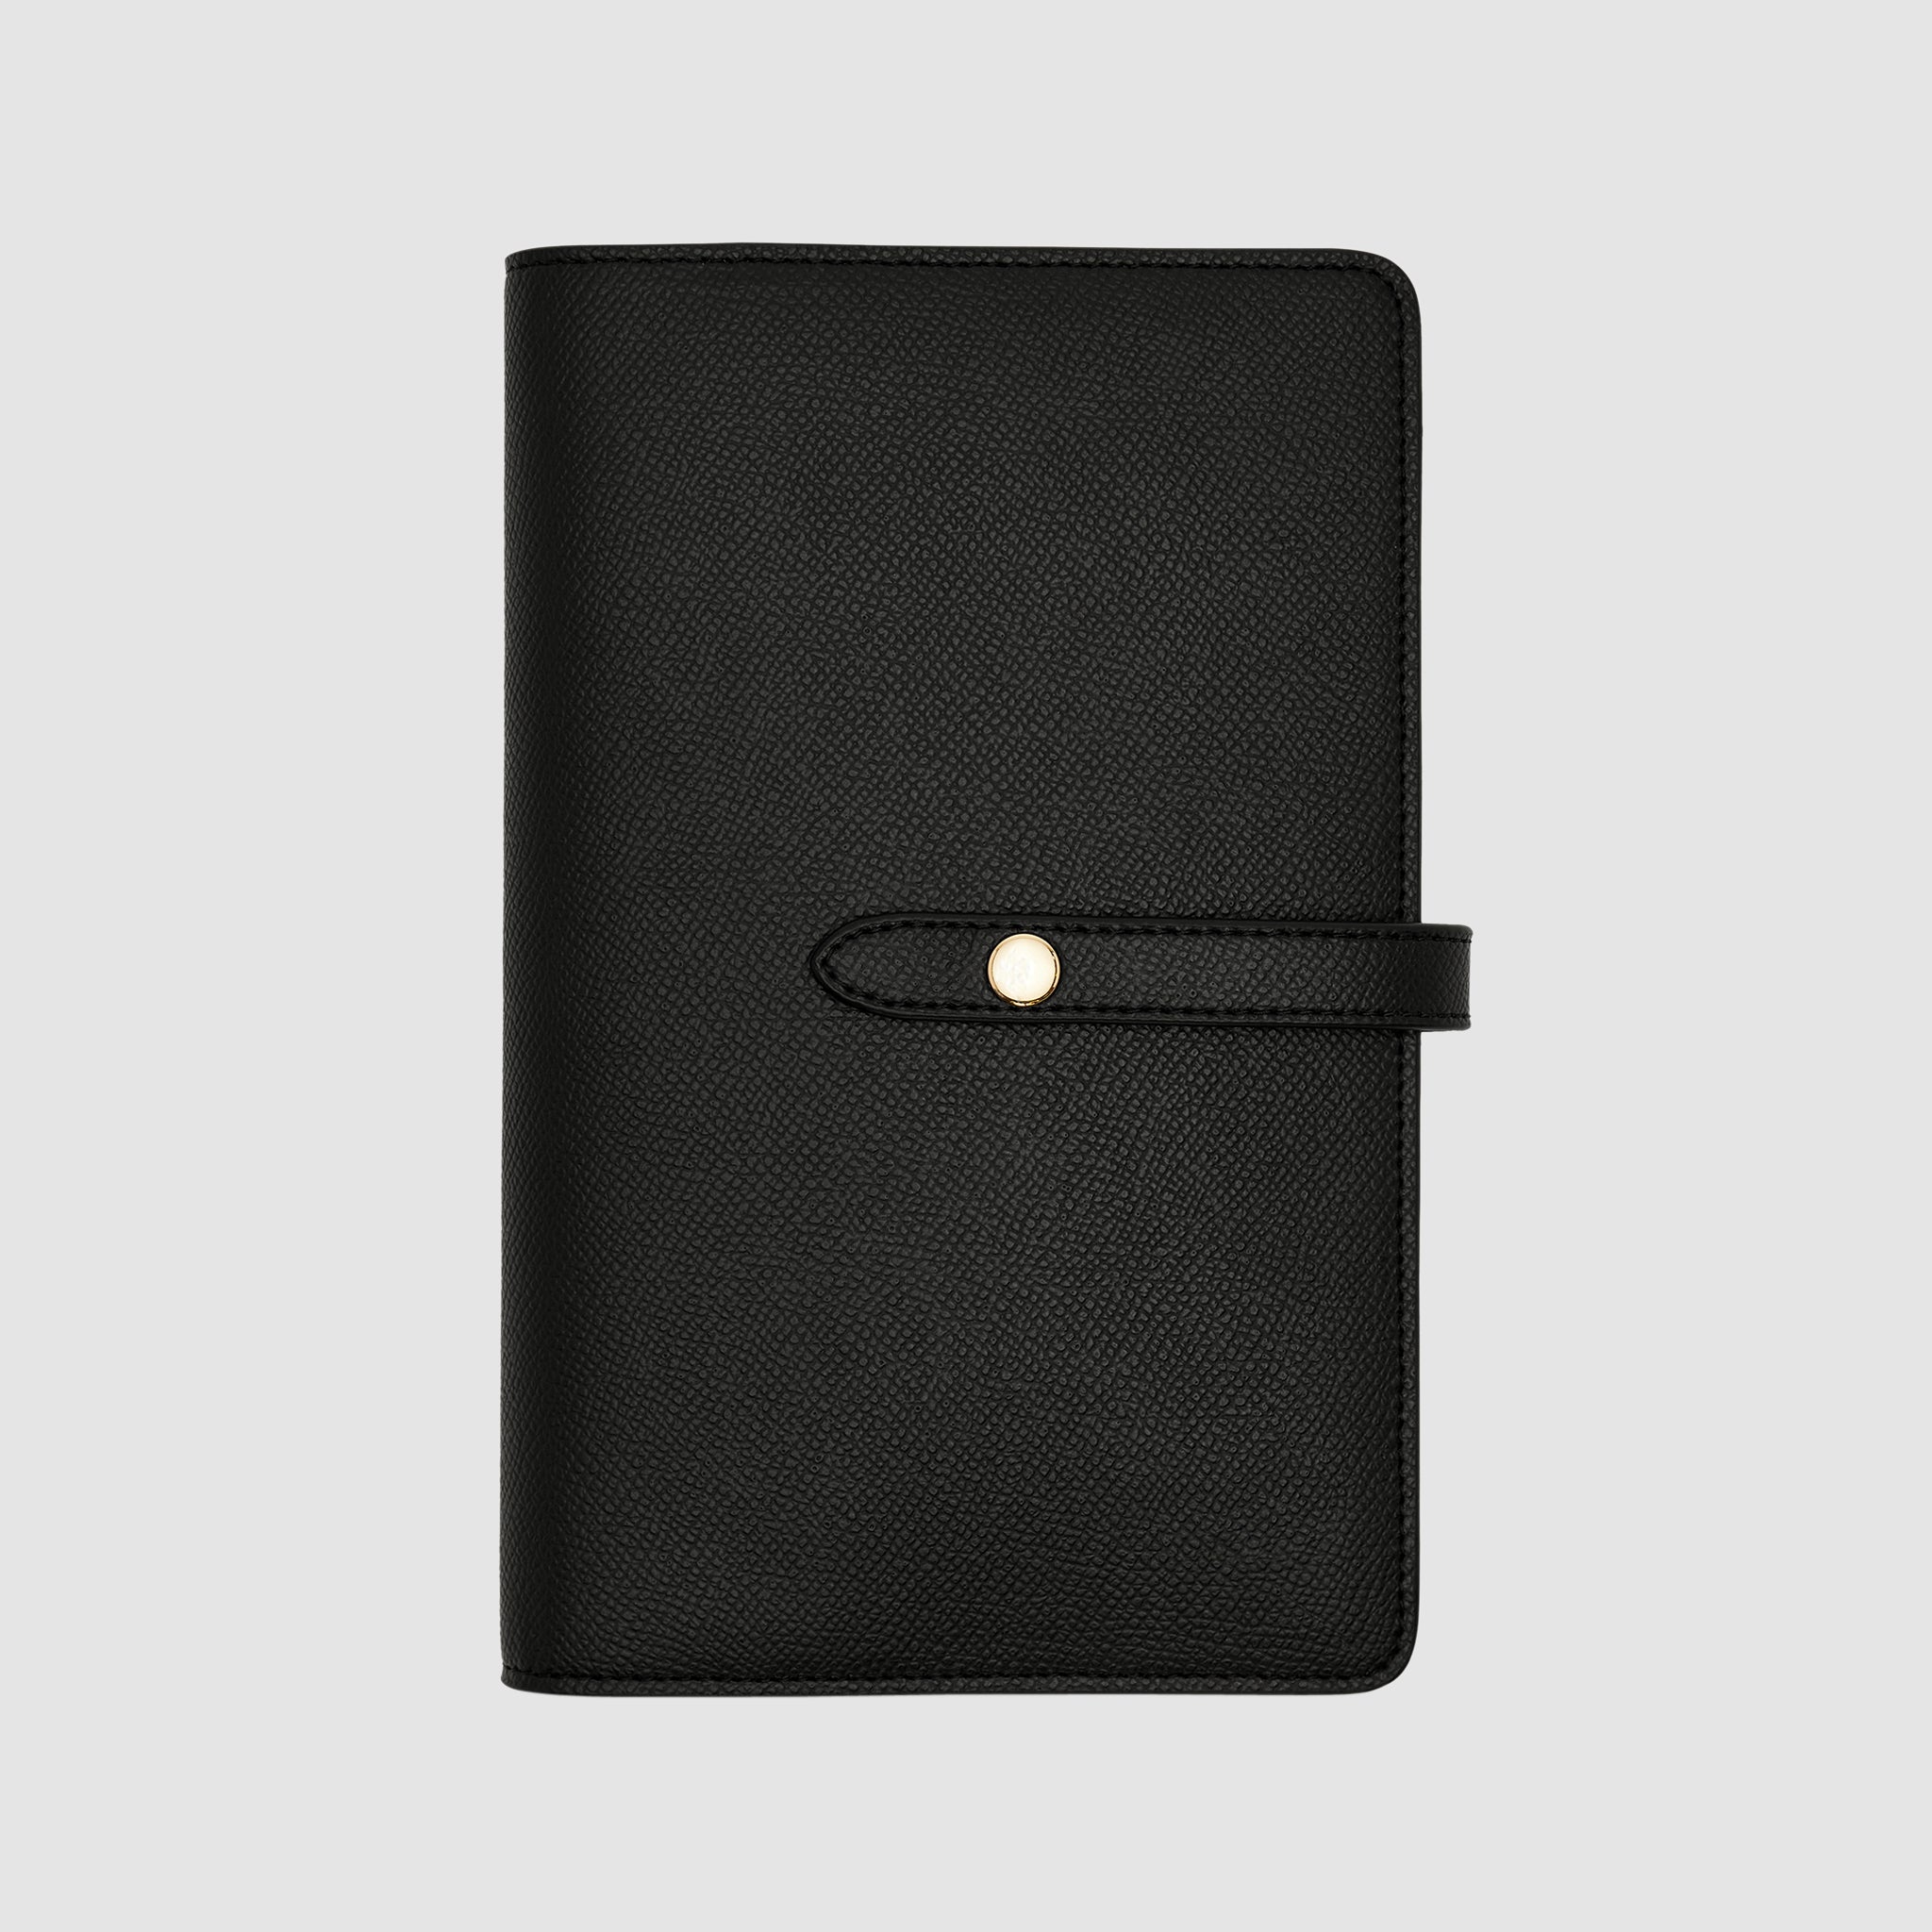 Personalised Essentials Flat Travel Wallet Black with initials | tde ...